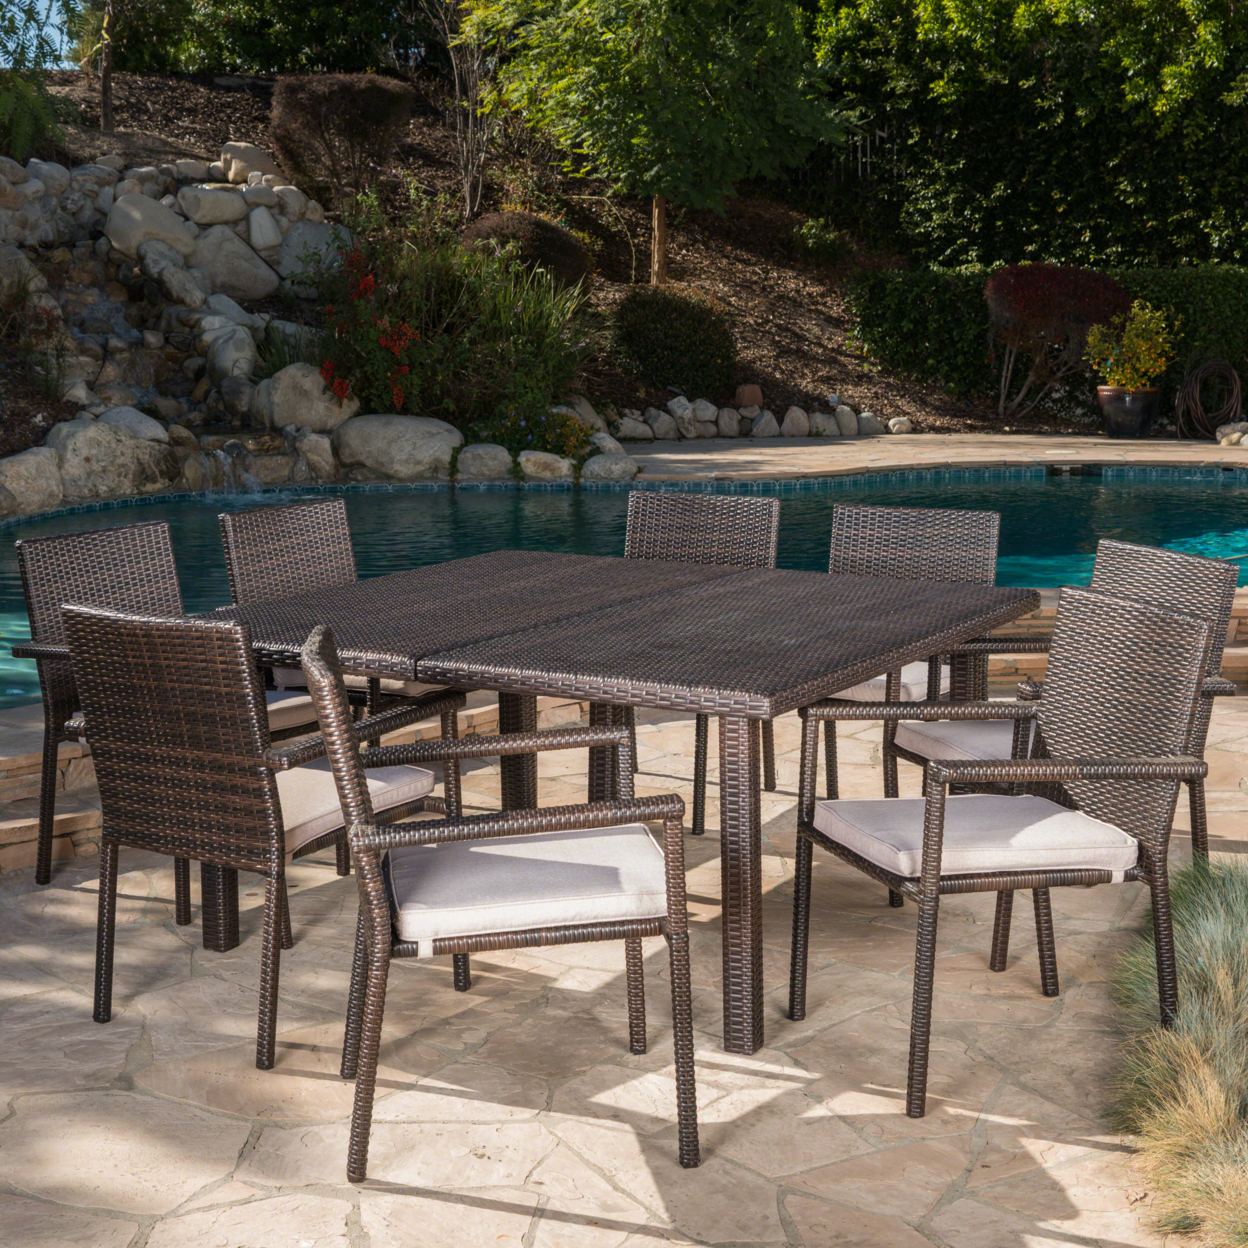 Bunny Outdoor 9 Piece Wicker Dining Set With Water Resistant Cushions - Gray/Silver